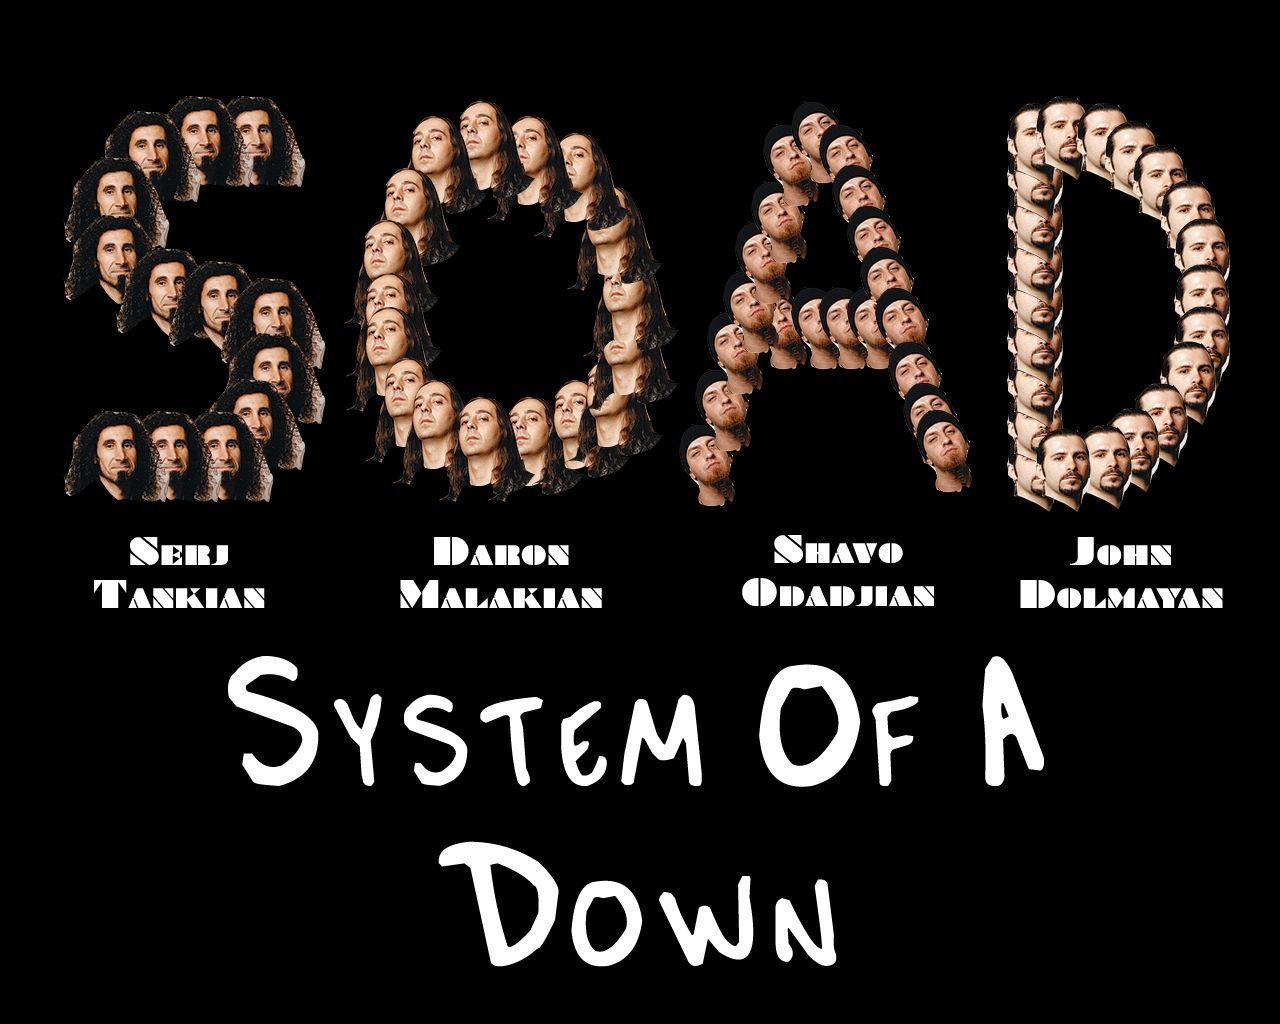 System of a down hd : Desktop and mobile wallpaper : Wallippo